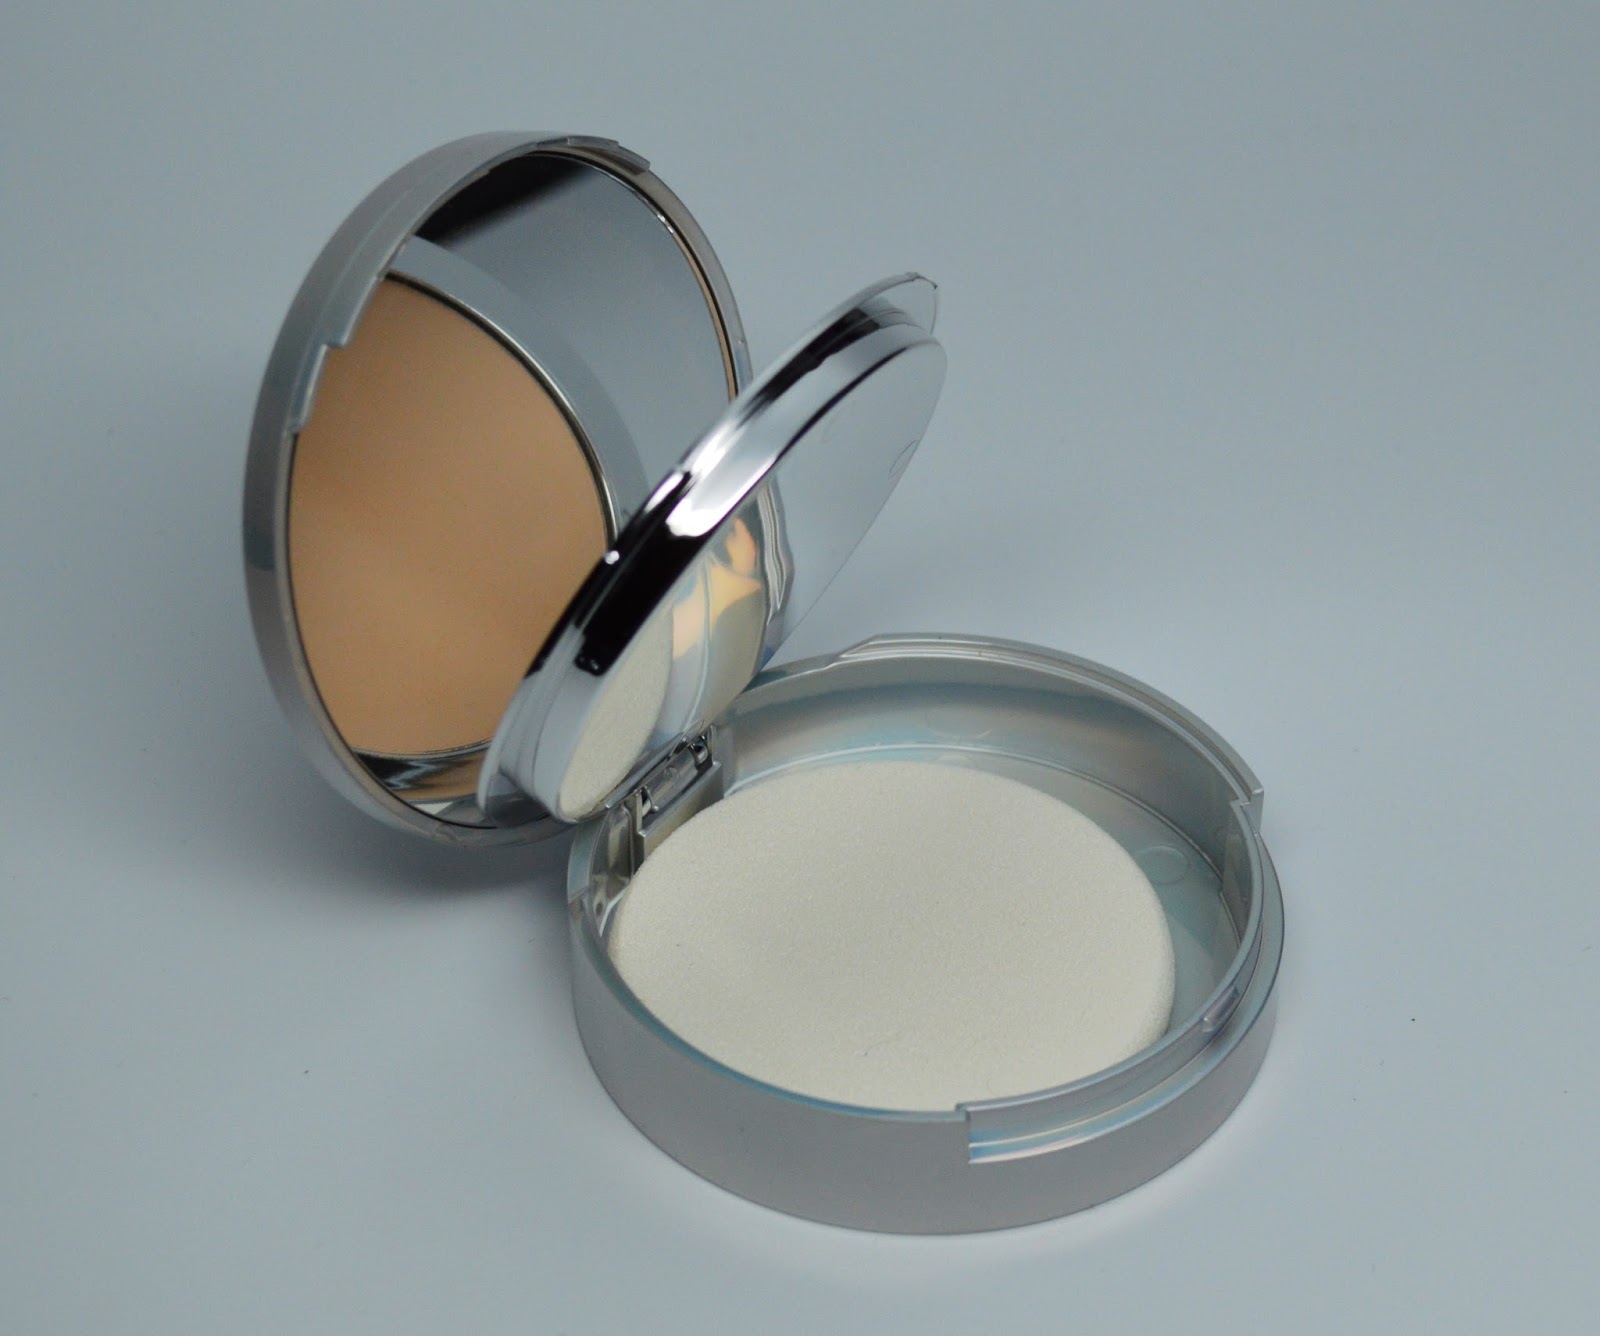 Image result for it cosmetics powder compact cc